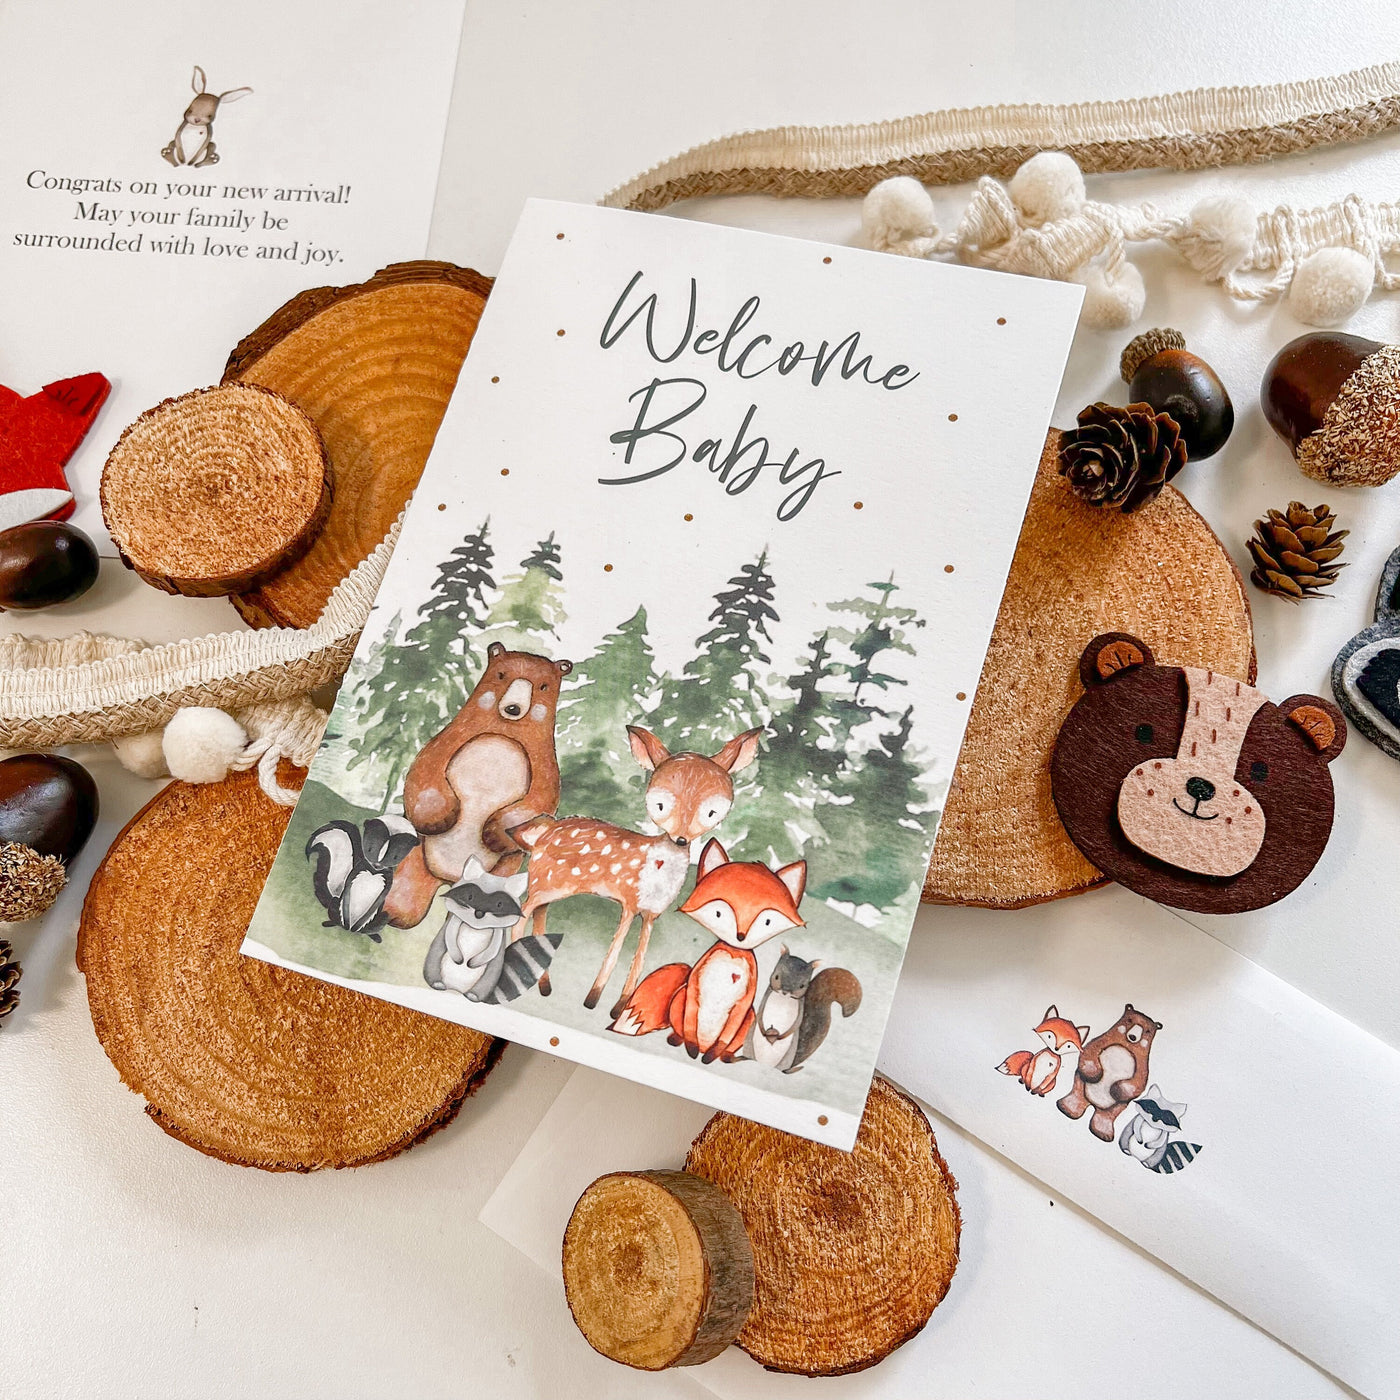 Welcome Baby Woodland Greeting Card with Custom-Printed Envelope